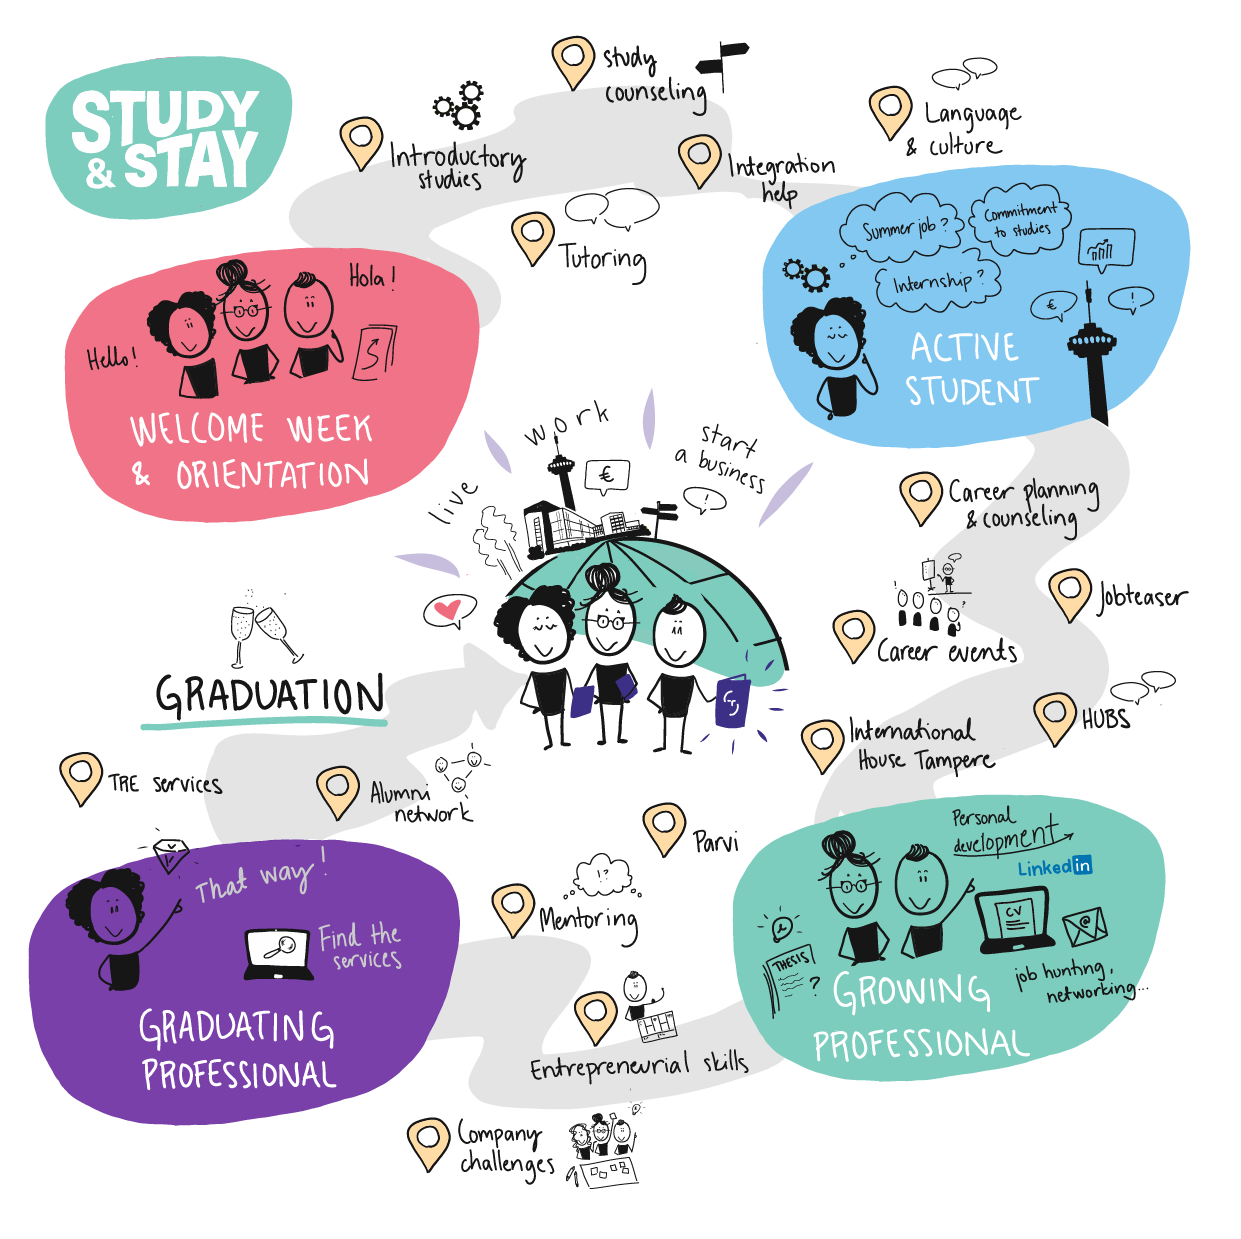 An image depicting the Study & Stay Model